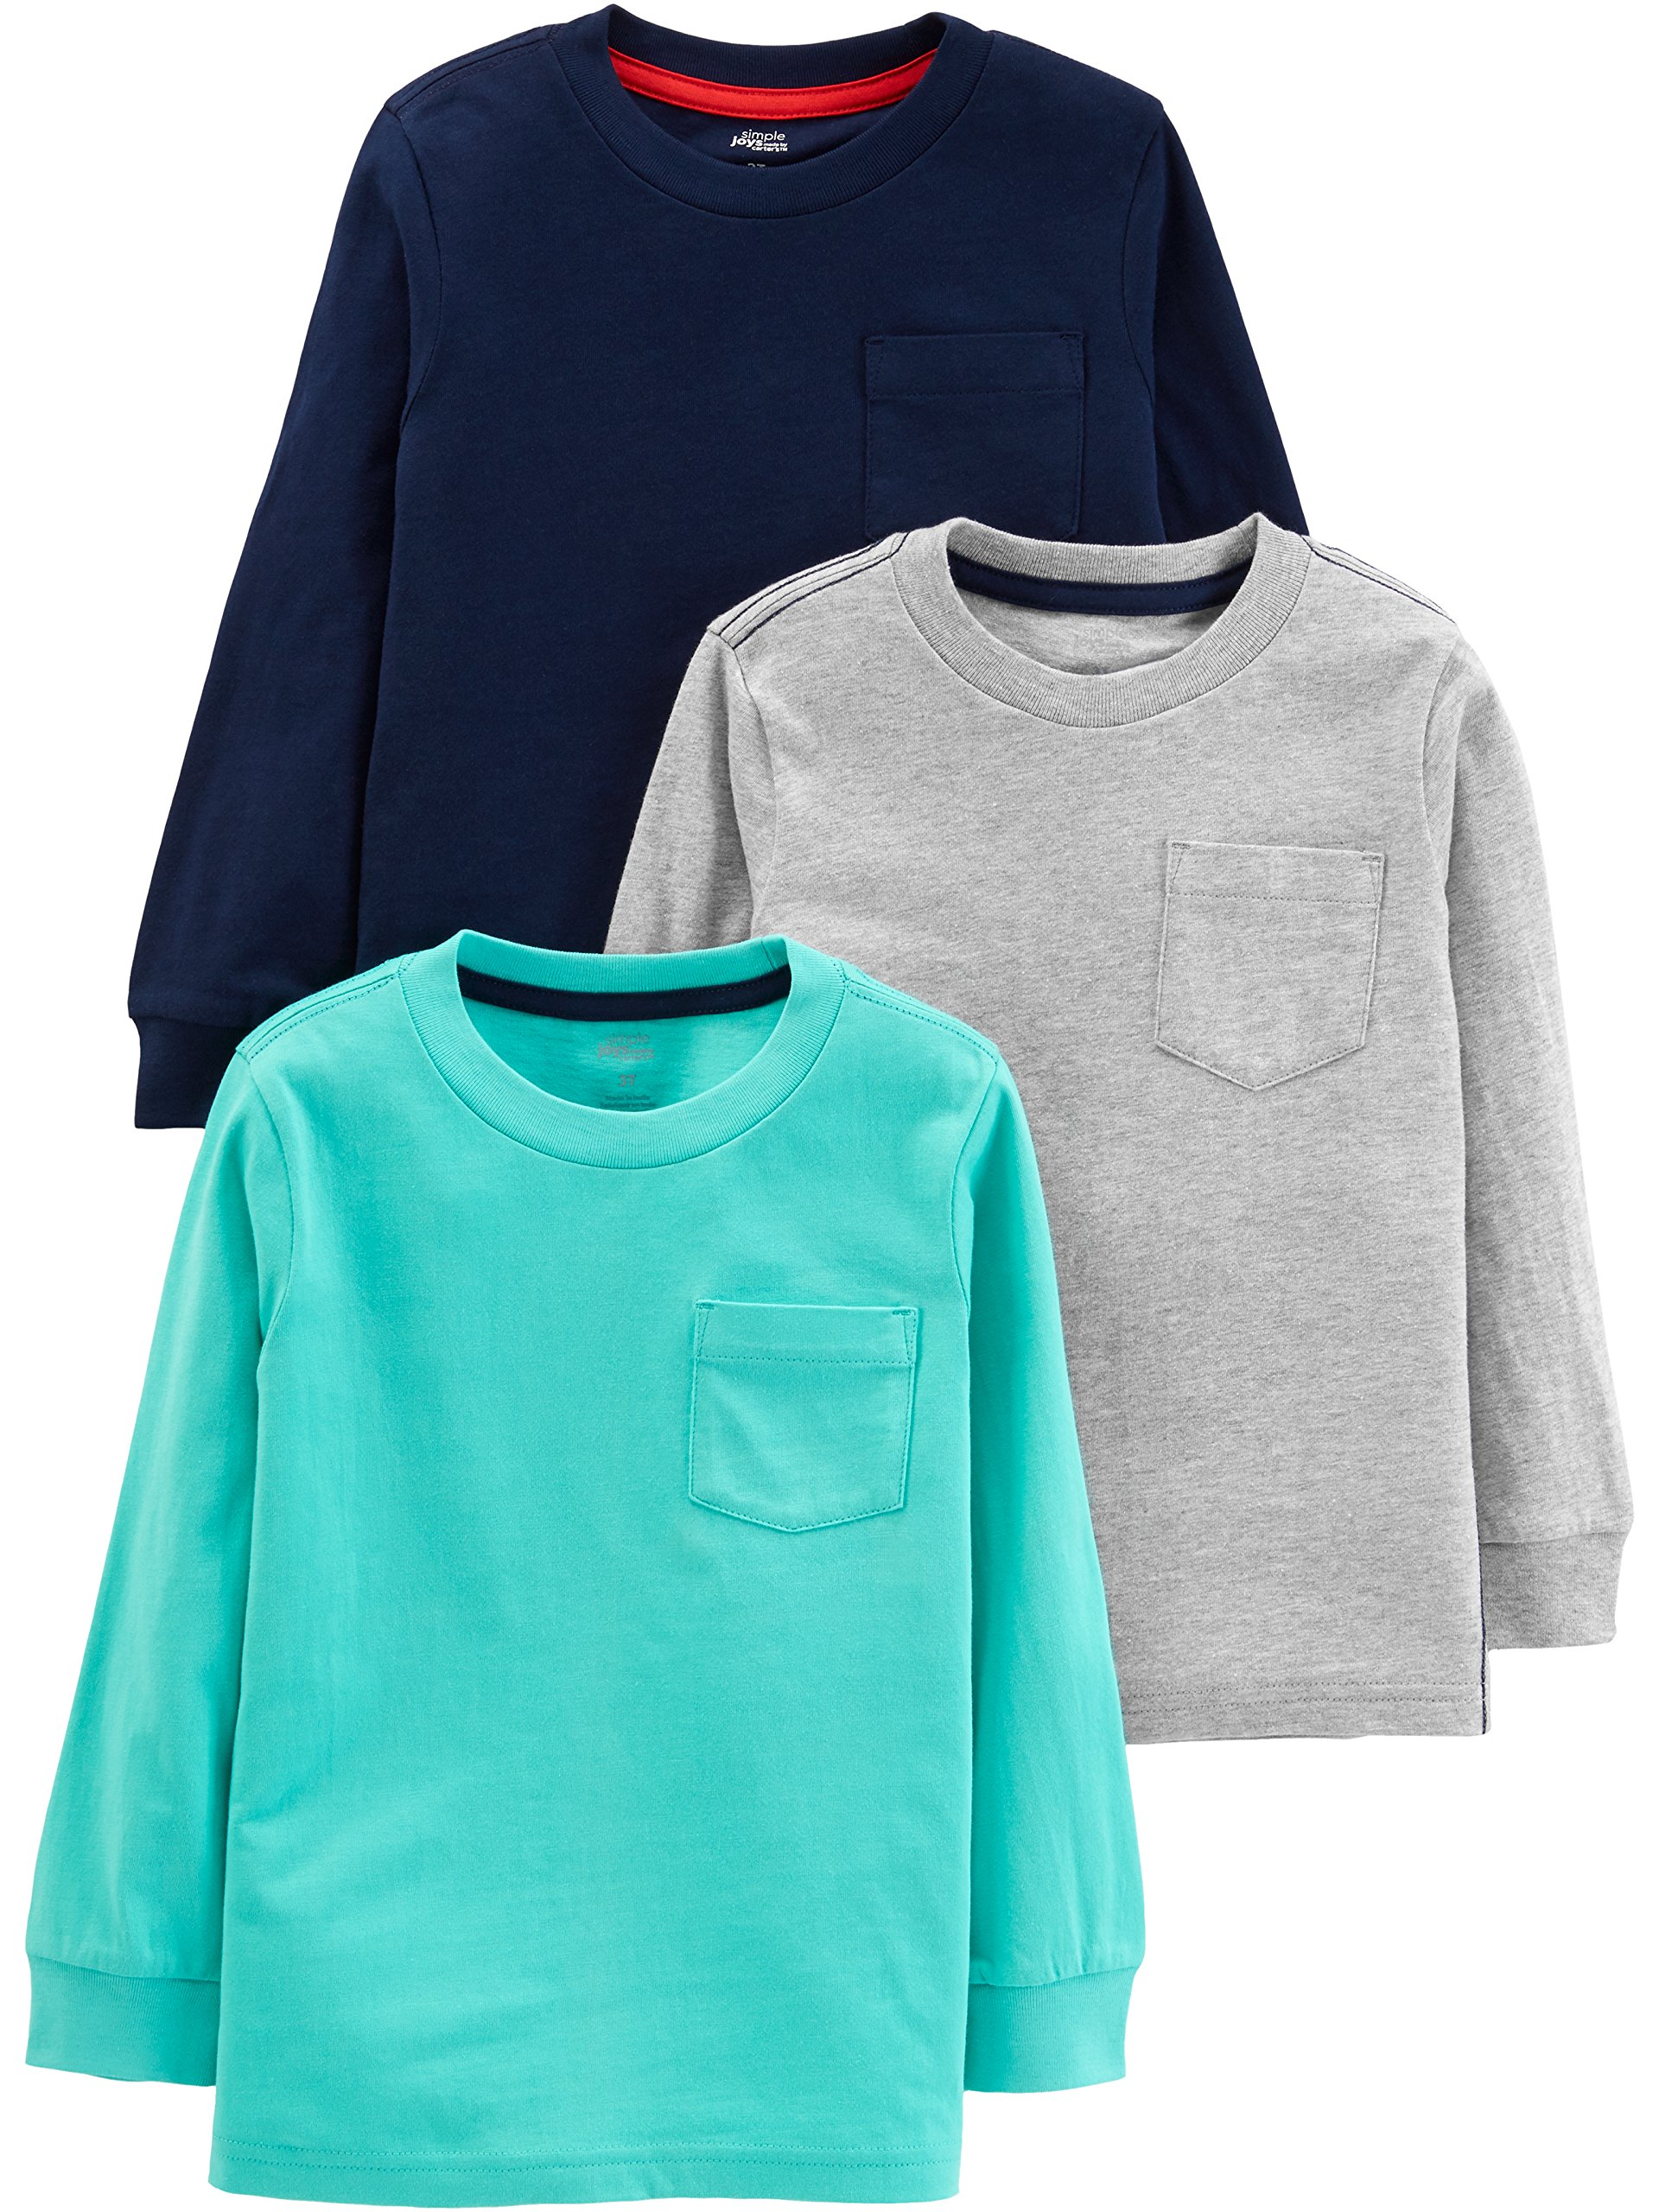 Simple Joys by Carter's Toddler Boys' Long-Sleeve Shirts, Pack of 3, Grey/Blue/Navy, 4T